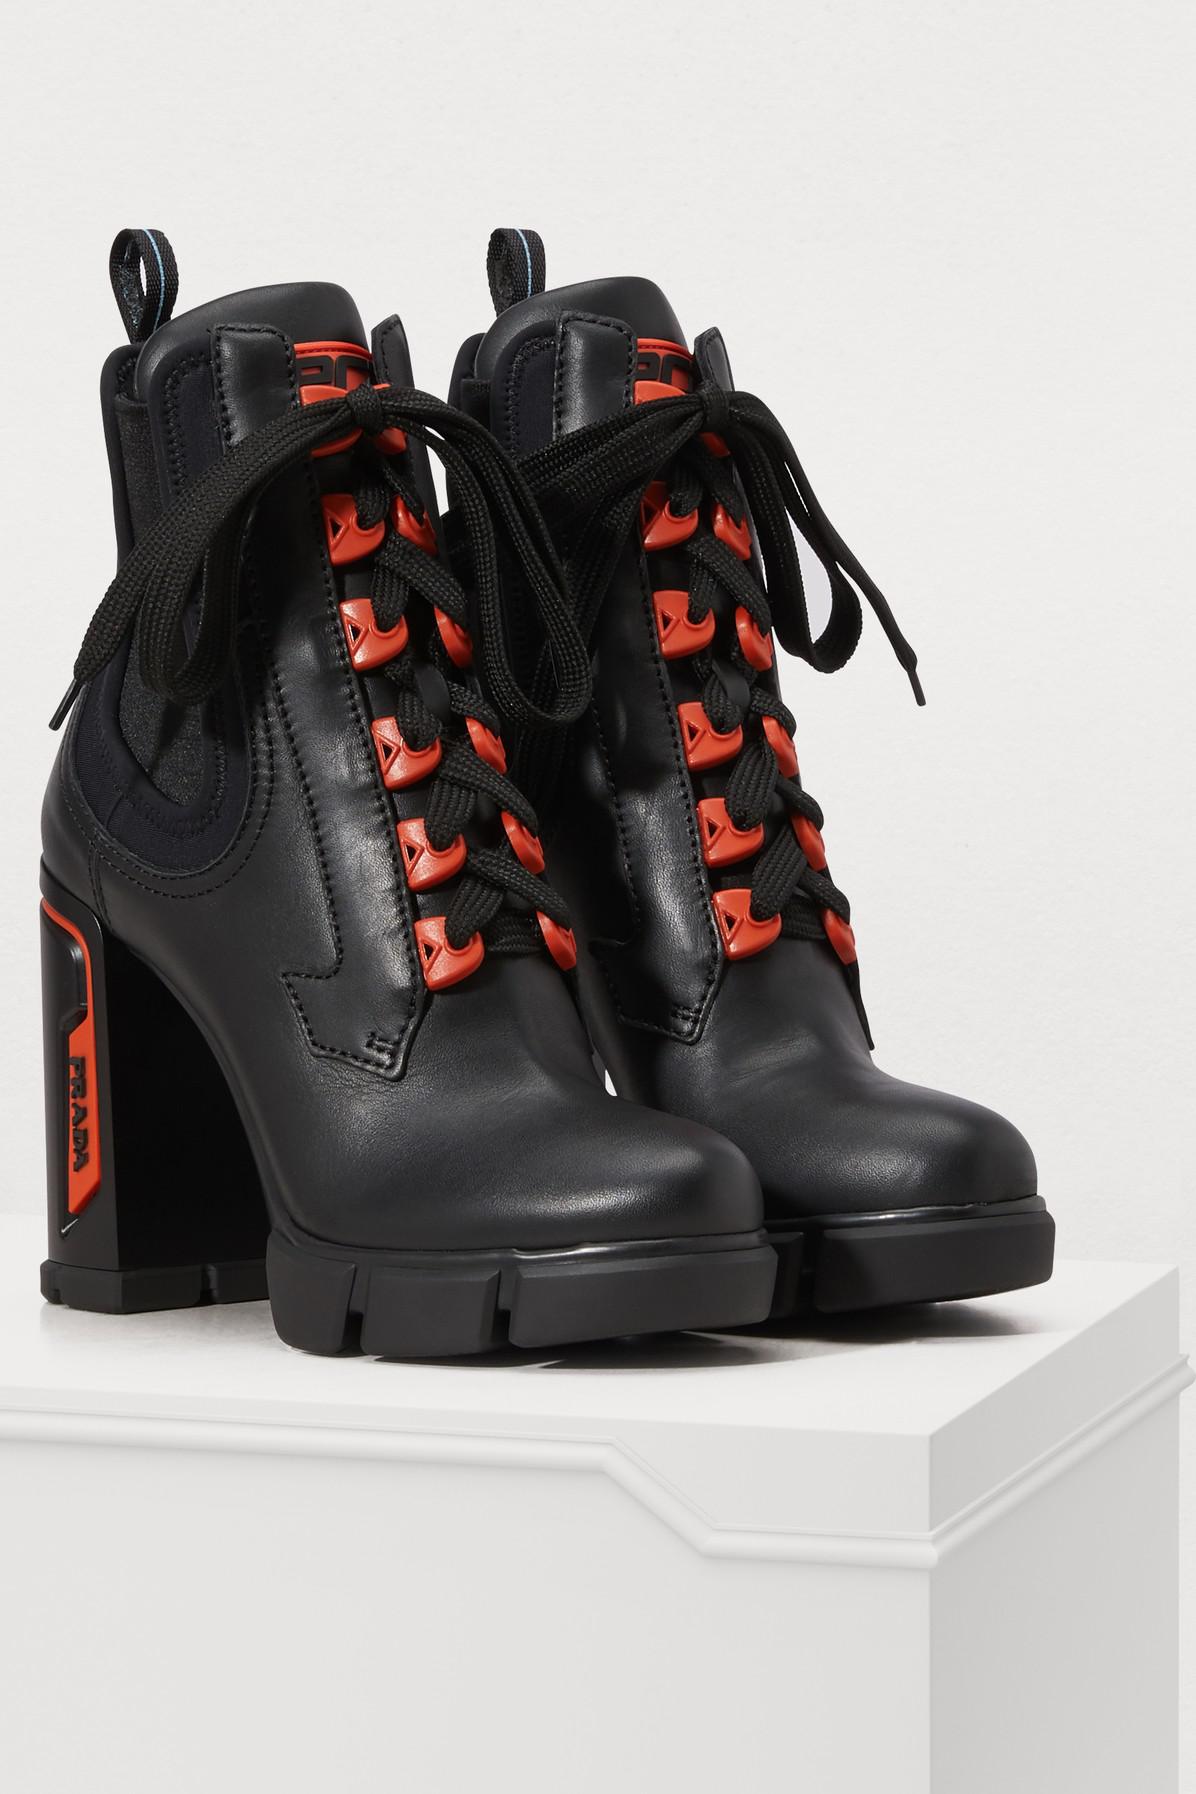 Prada Leather Ankle Boots in Black | Lyst